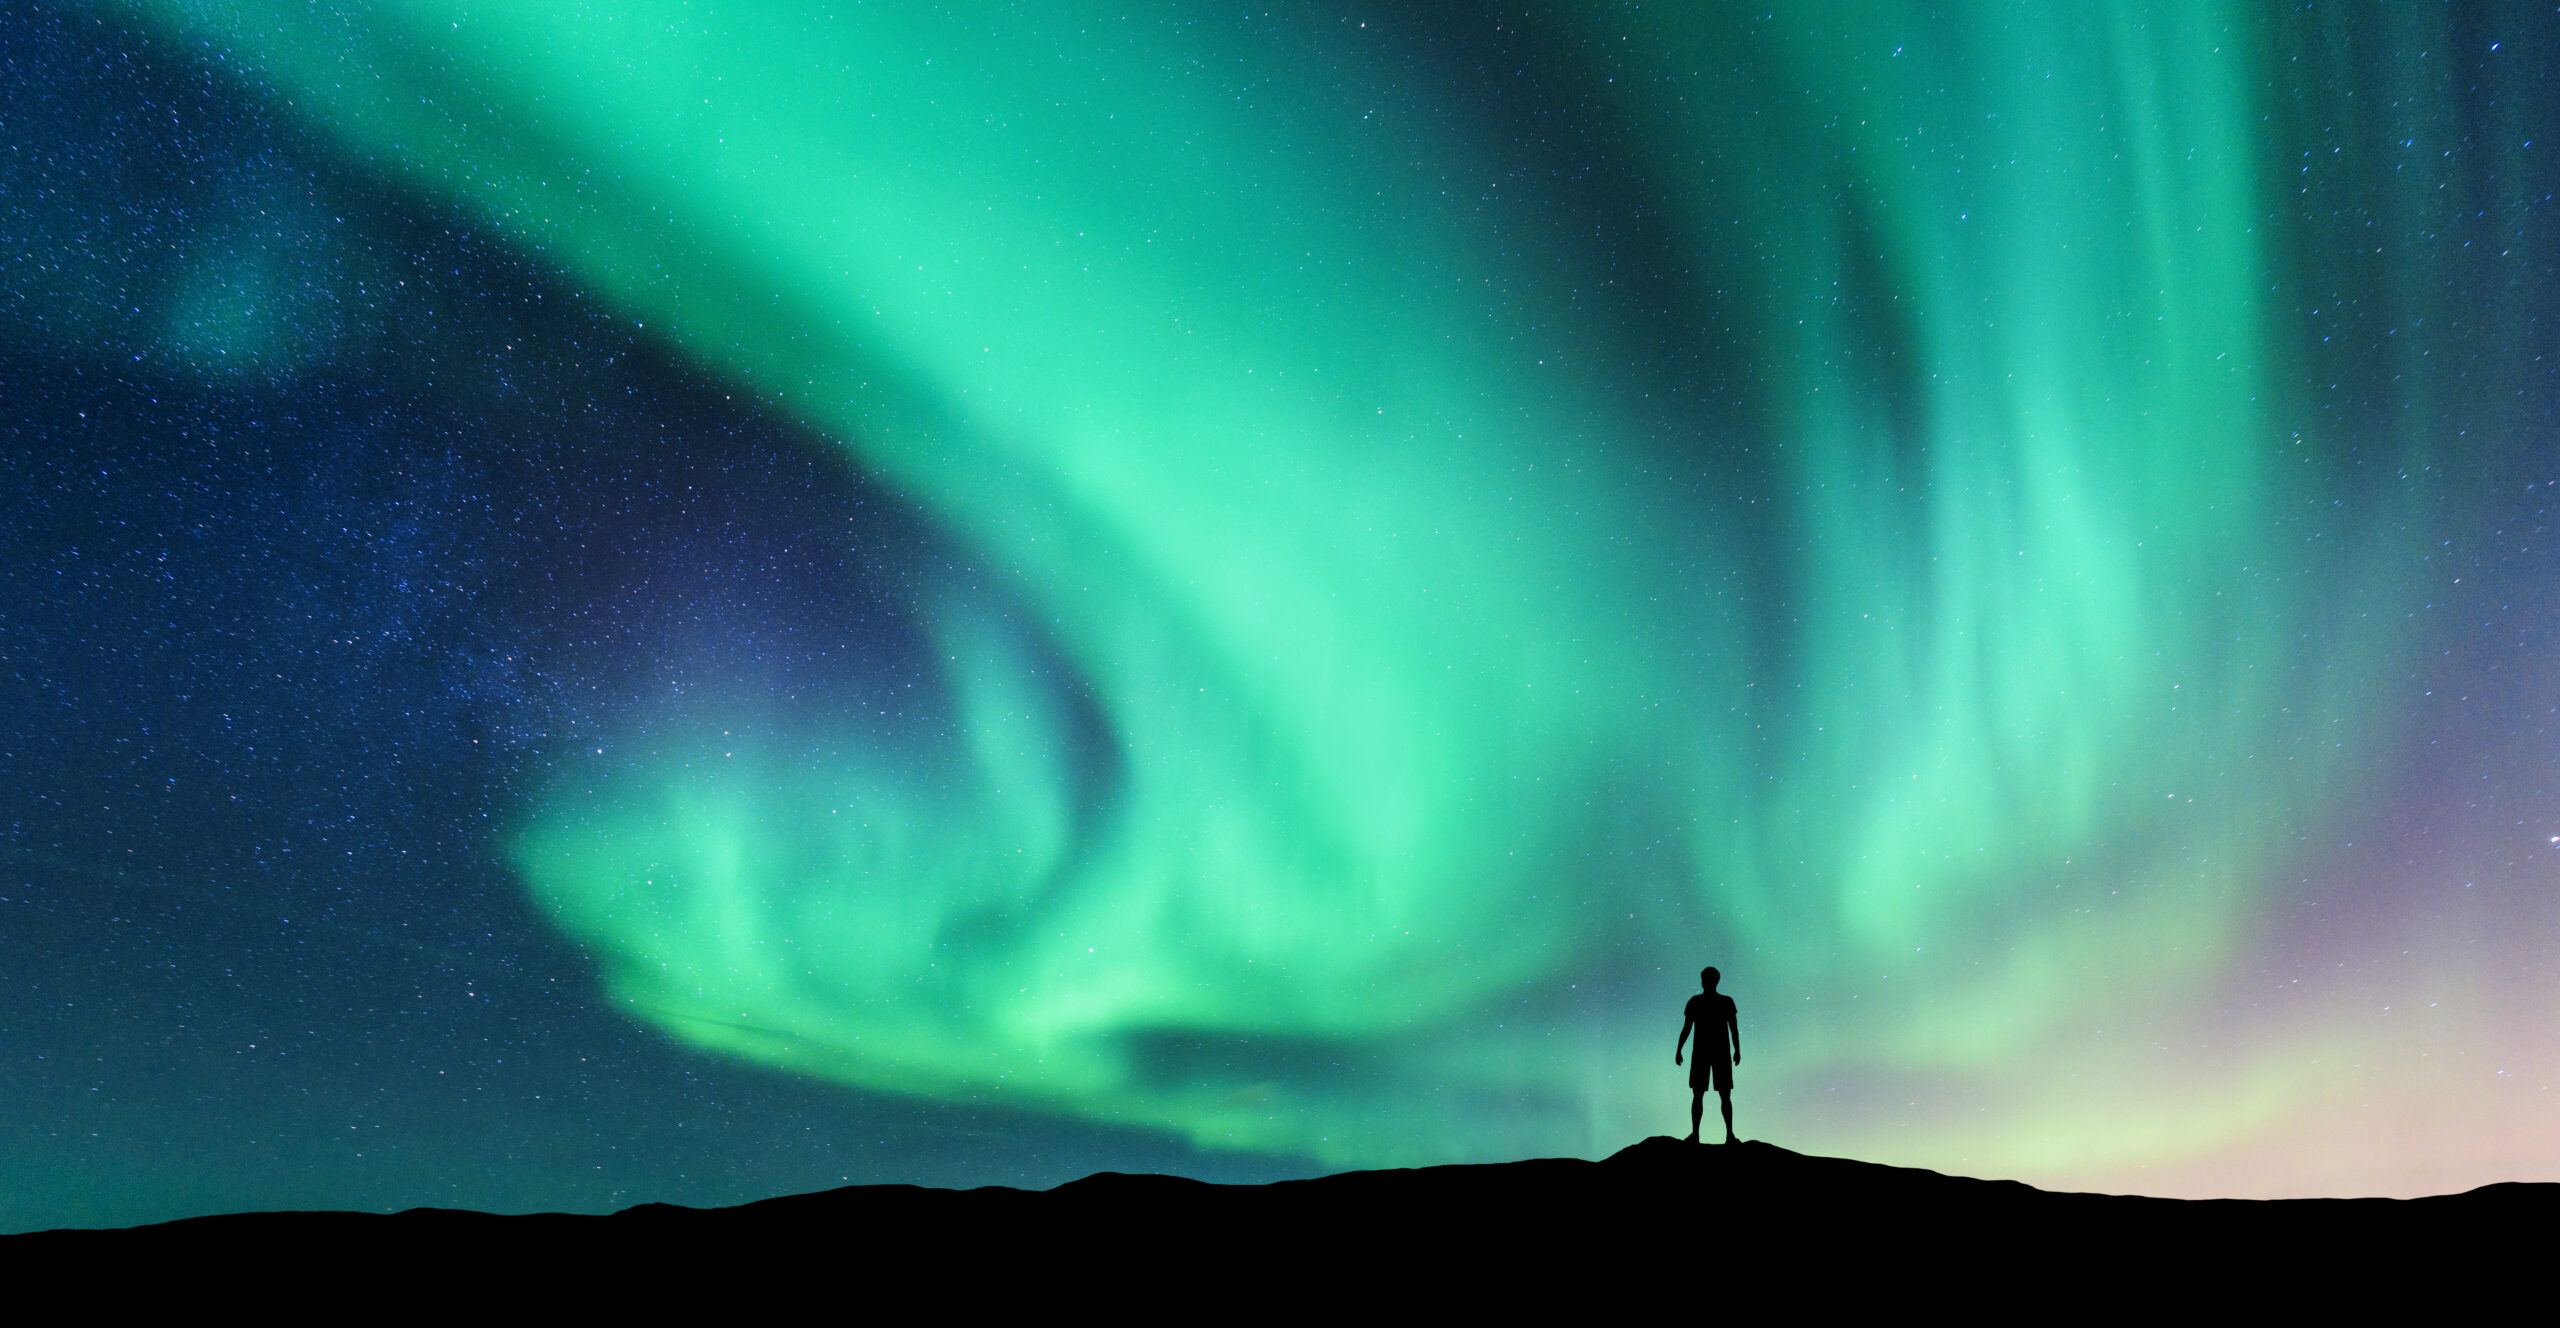 Aurora borealis and silhouette of standing man. Lofoten islands, Norway. Aurora and happy man. Sky with stars and green polar lights. Night landscape with aurora and people. Concept. Nature background.